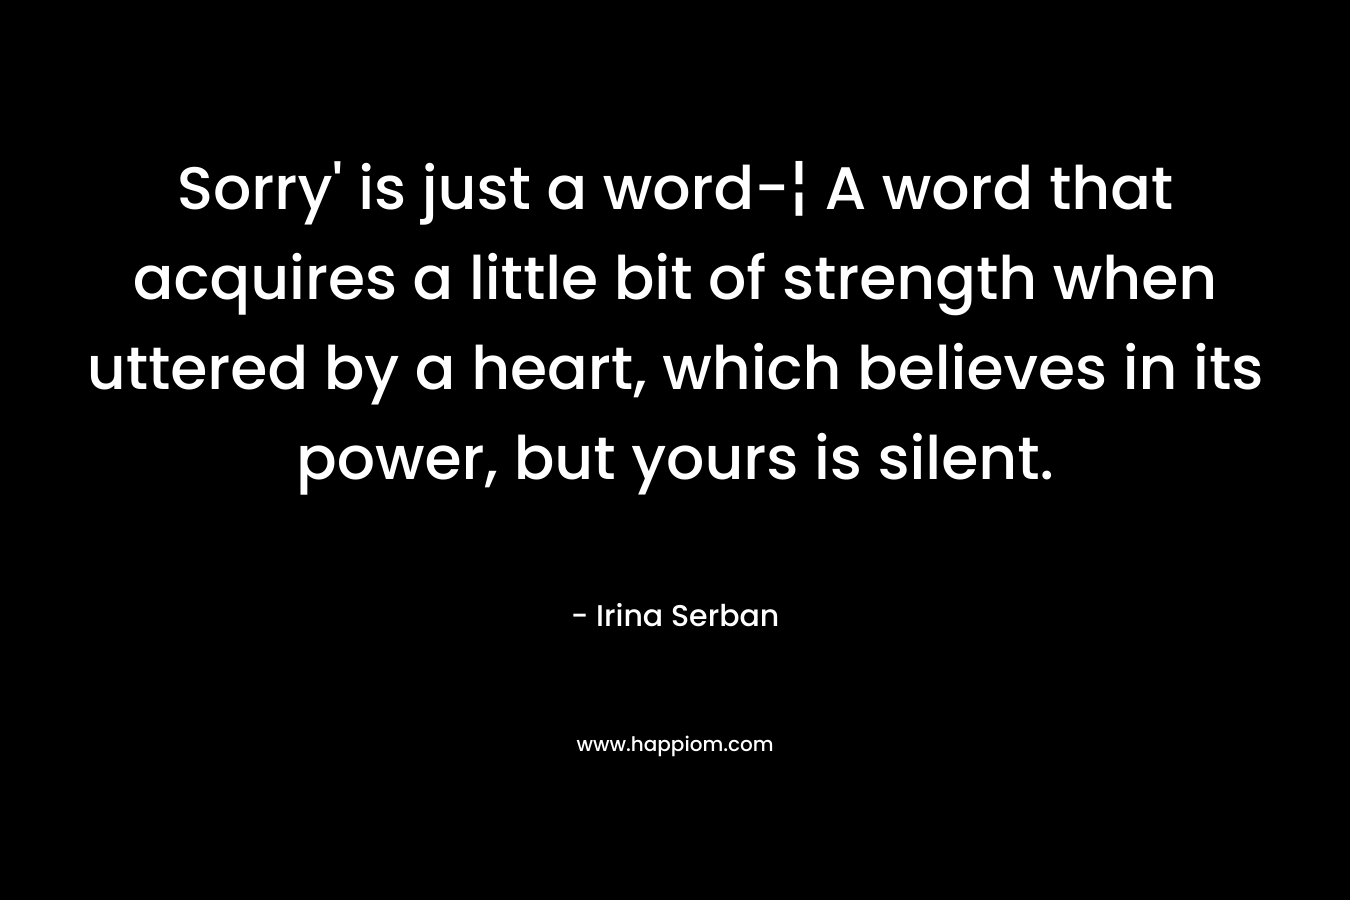 Sorry' is just a word-¦ A word that acquires a little bit of strength when uttered by a heart, which believes in its power, but yours is silent.